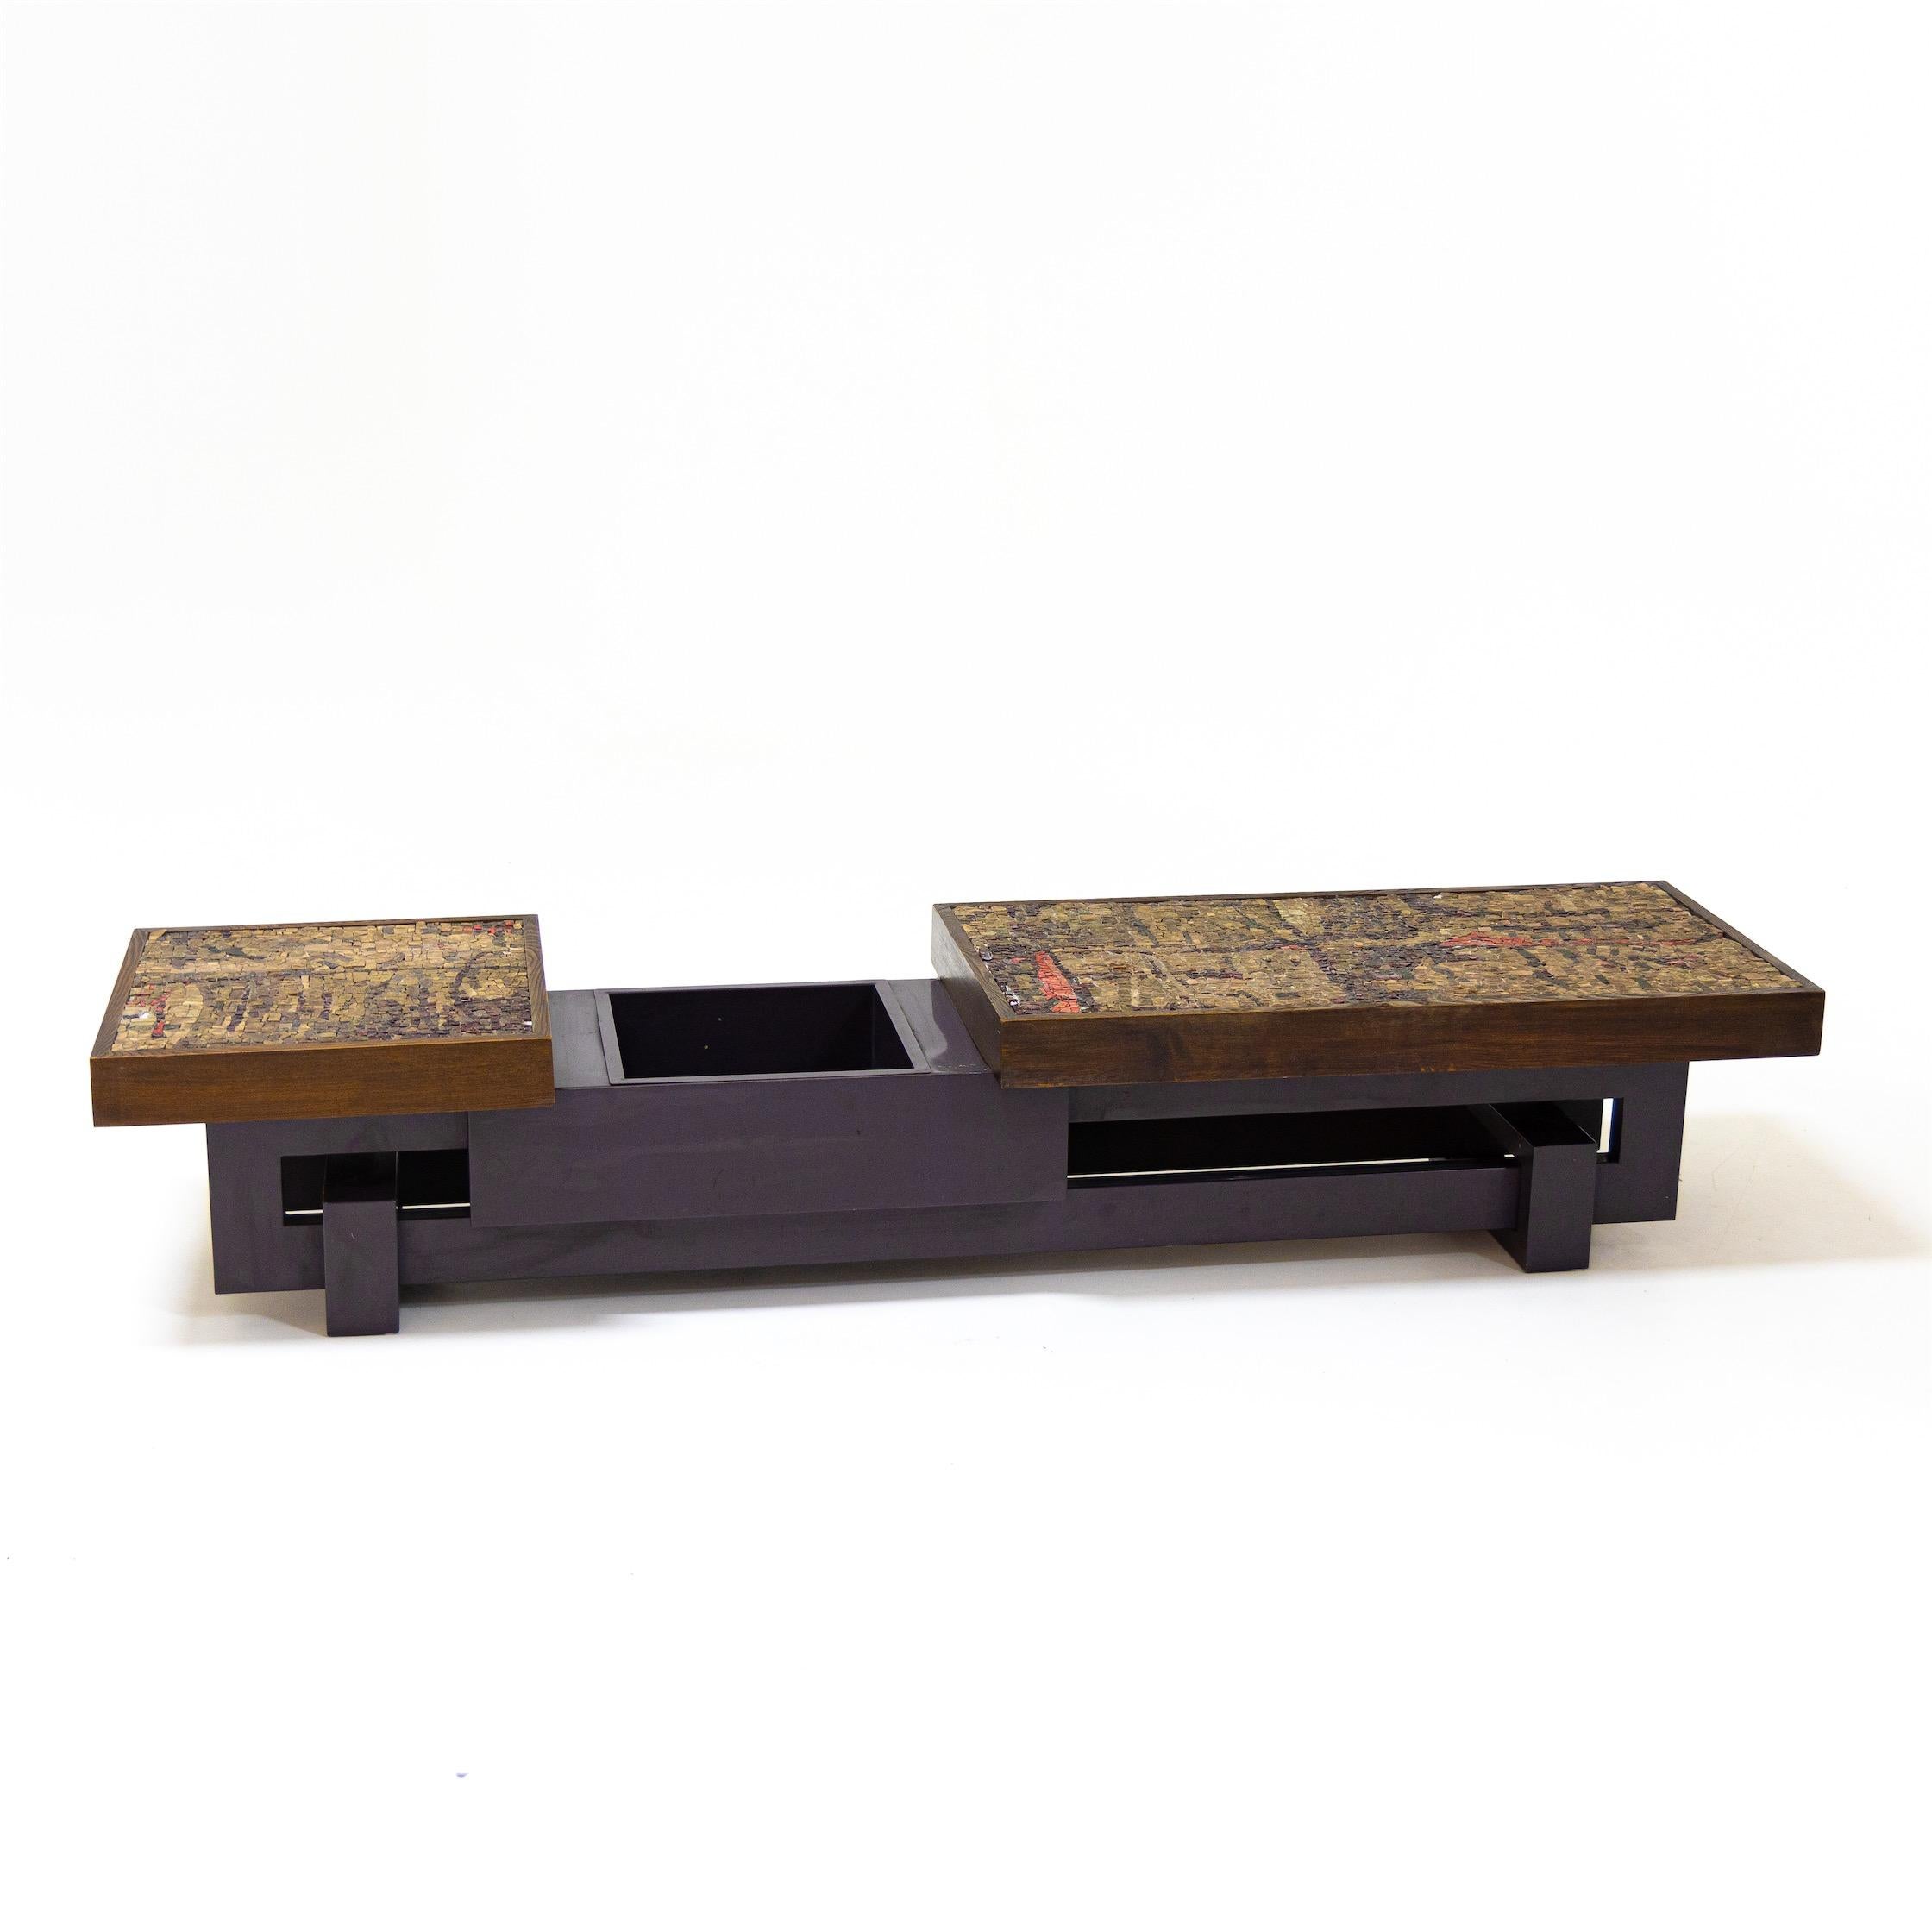 Long coffee table with stone mosaic and central plant bowl on a geometrically constructed, dark base.